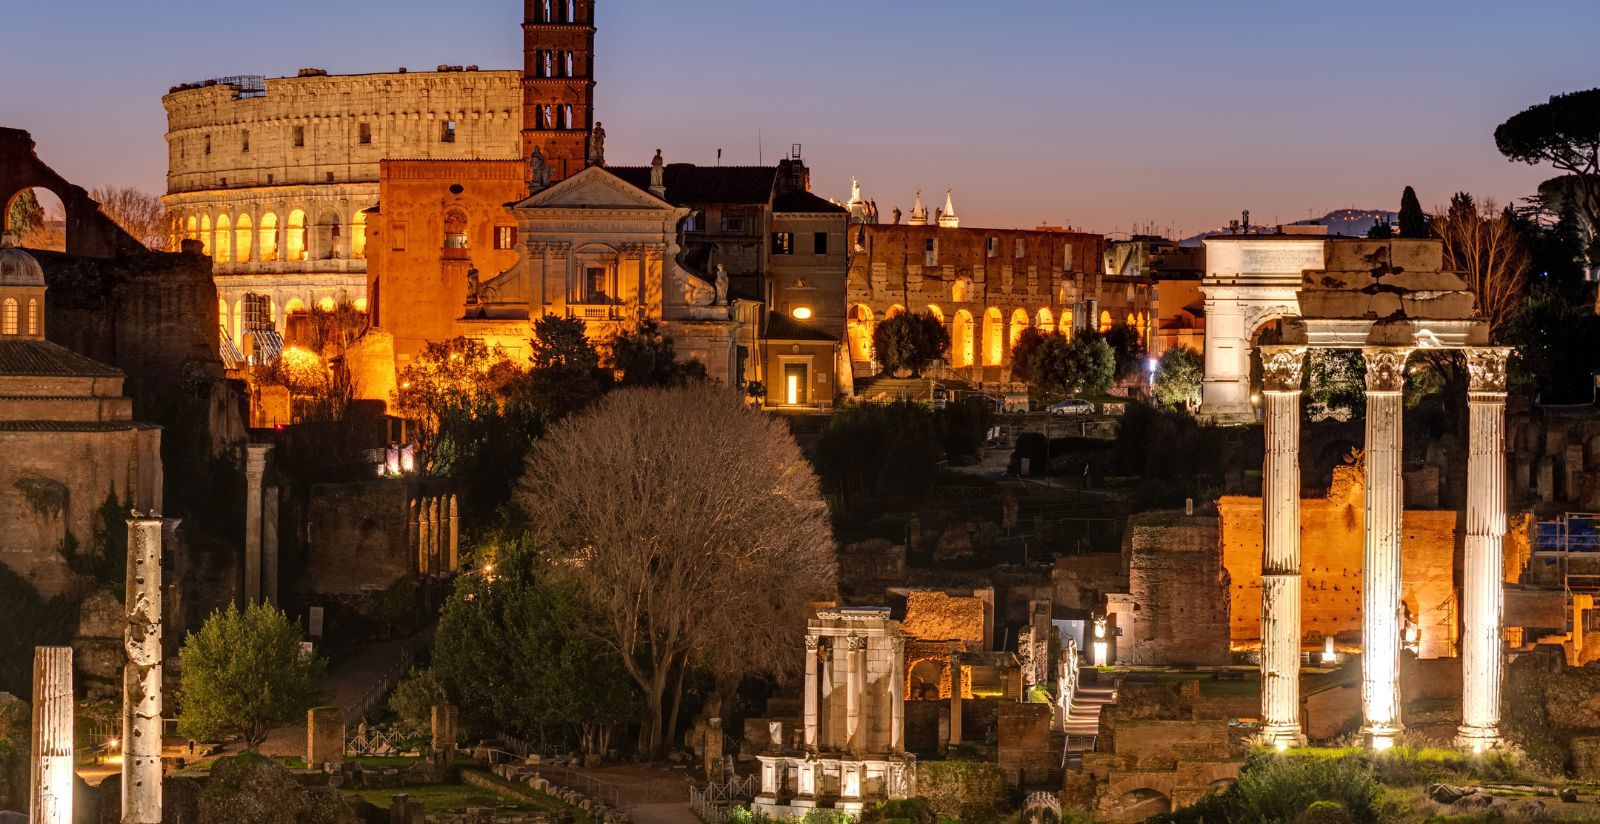 PHOTO TOUR ROME BY NIGHT